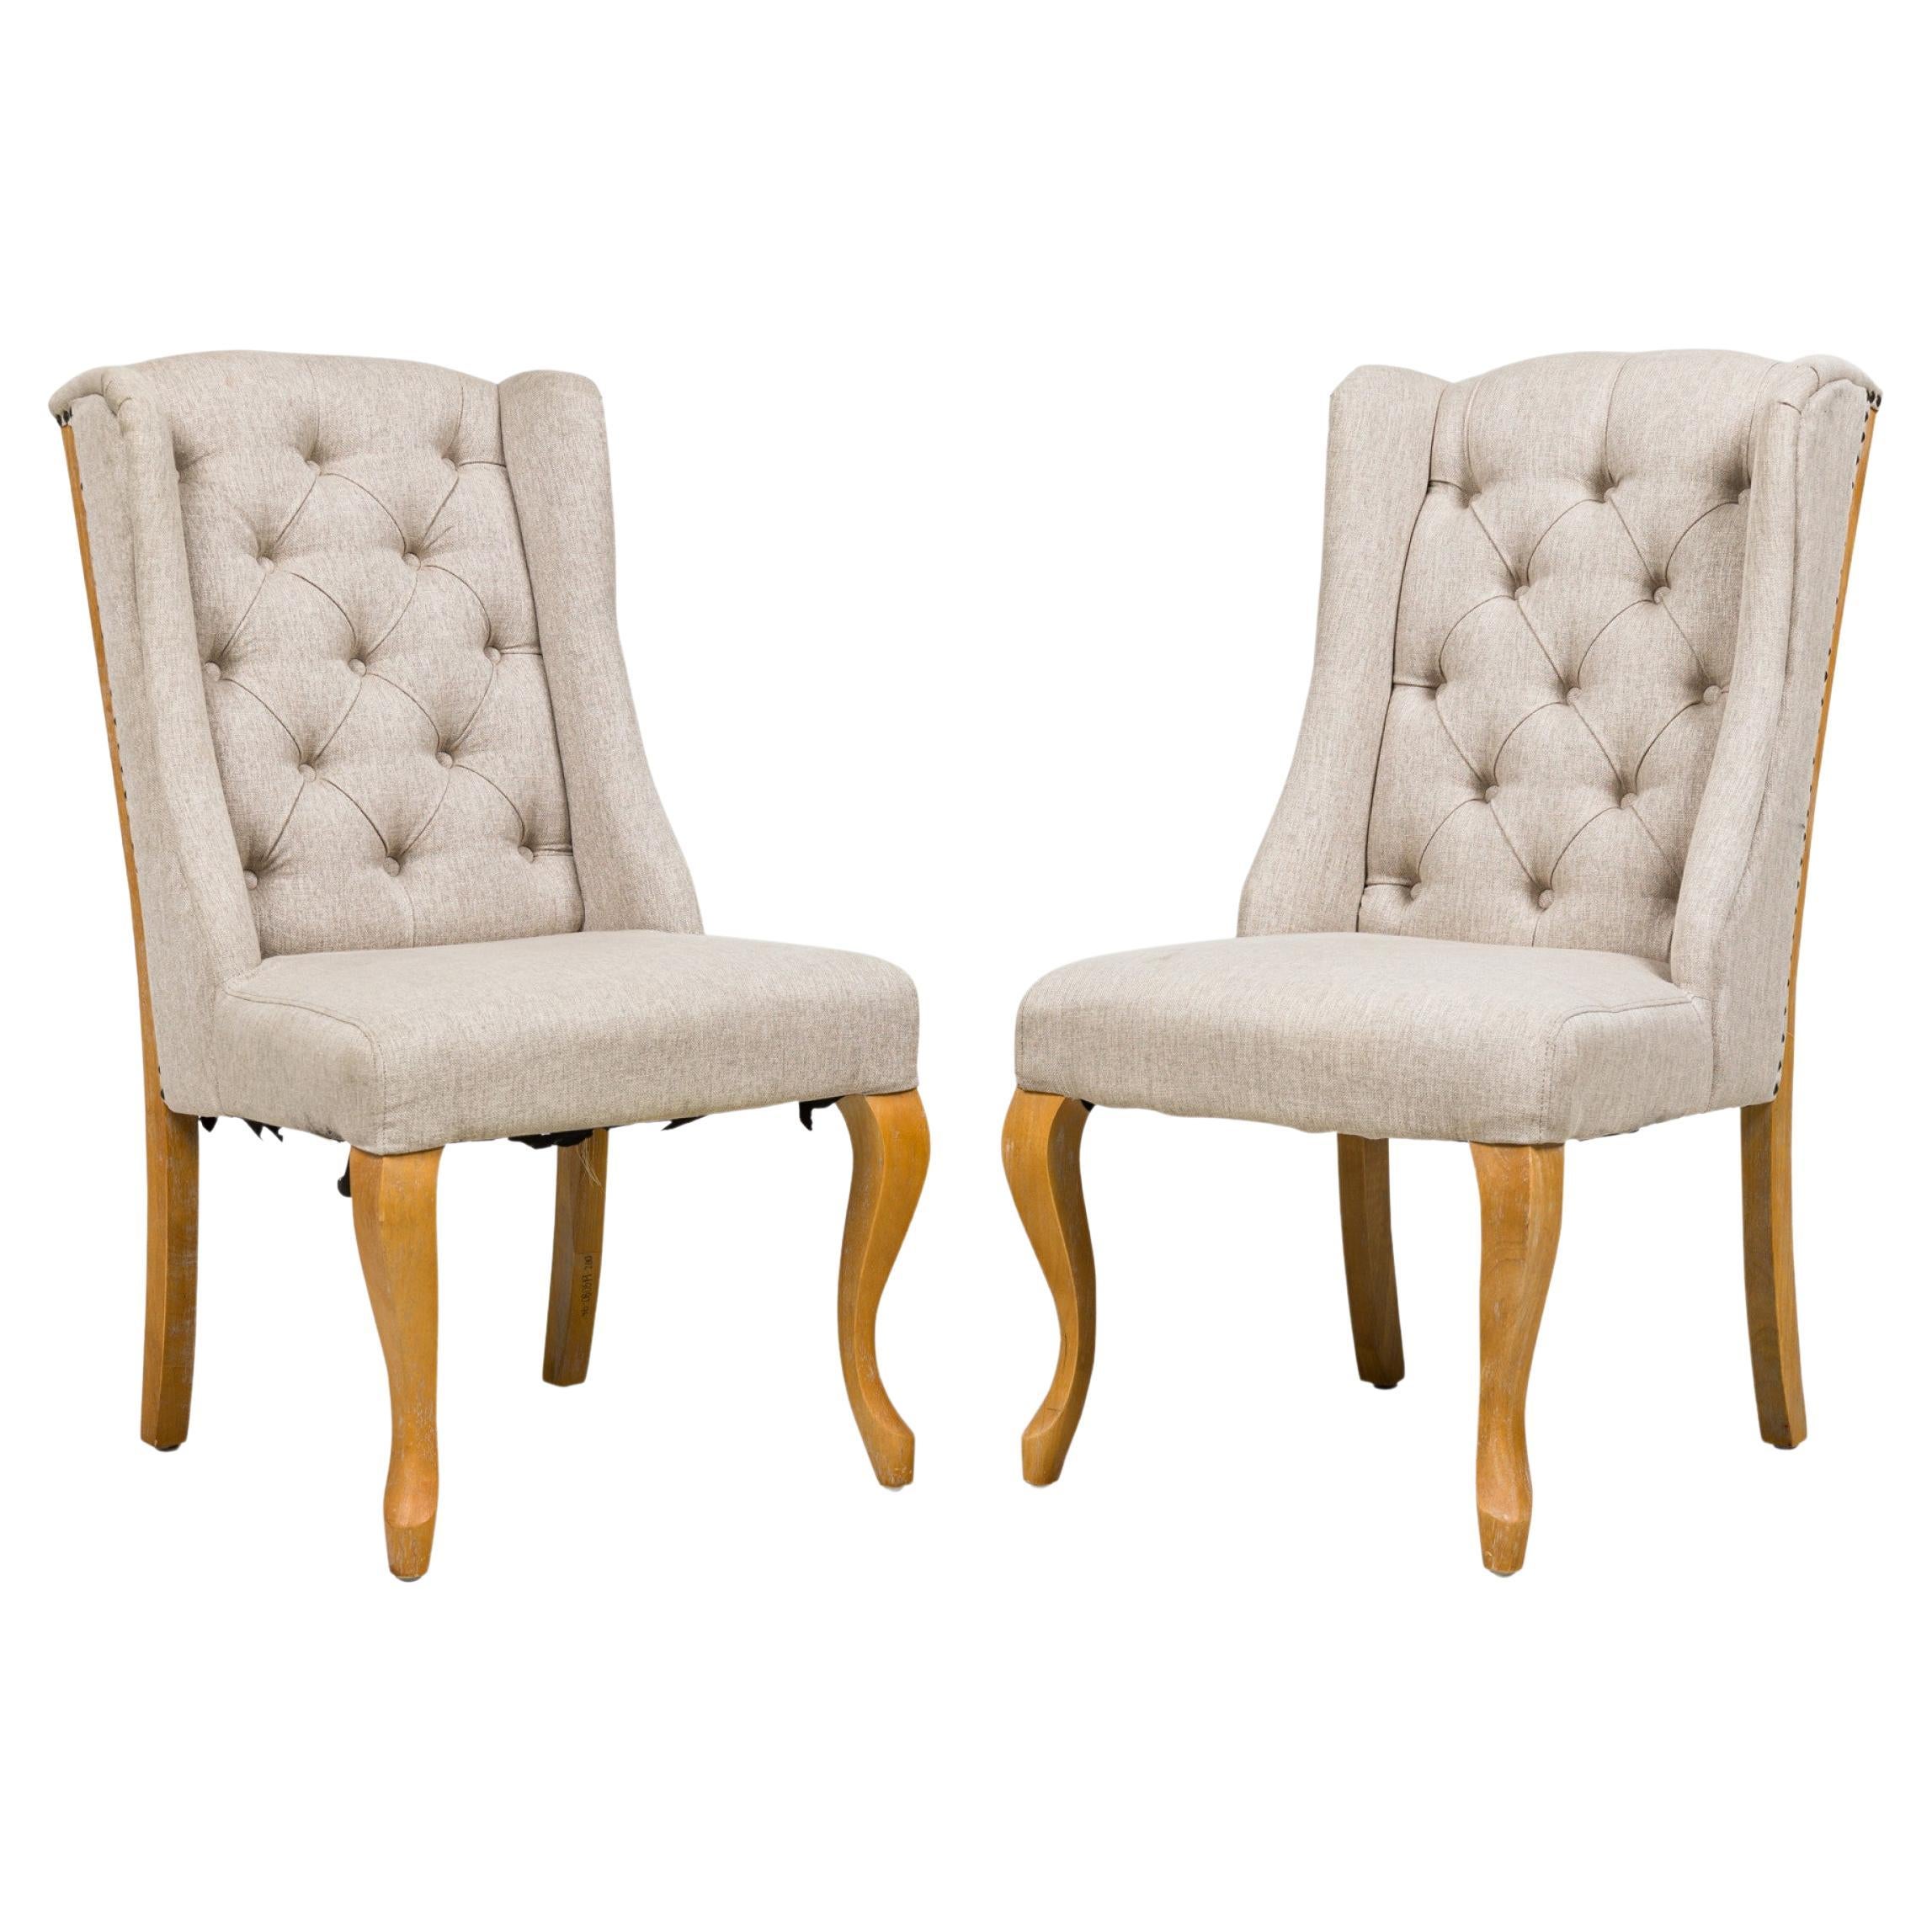 5 Contemporary American dining side chairs with wing-style sloped backs, button tufted light gray woven upholstery, gun metal gray nailhead trim, standing on 2 cabriole front legs and splayed back legs. (PRICED EACH).